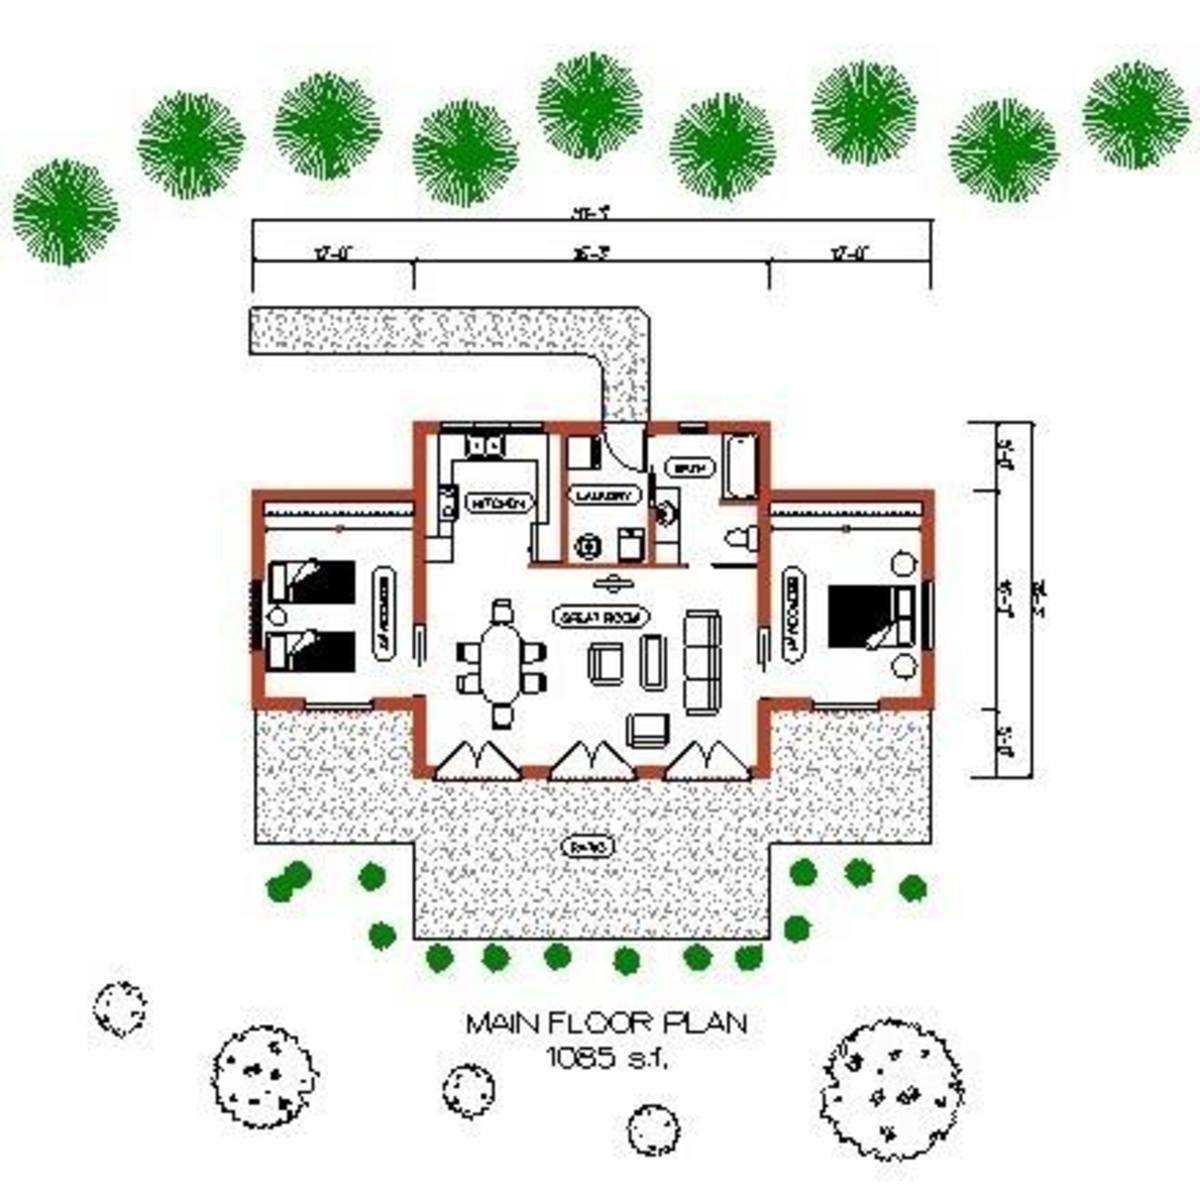 This is the main floor plan of my home.